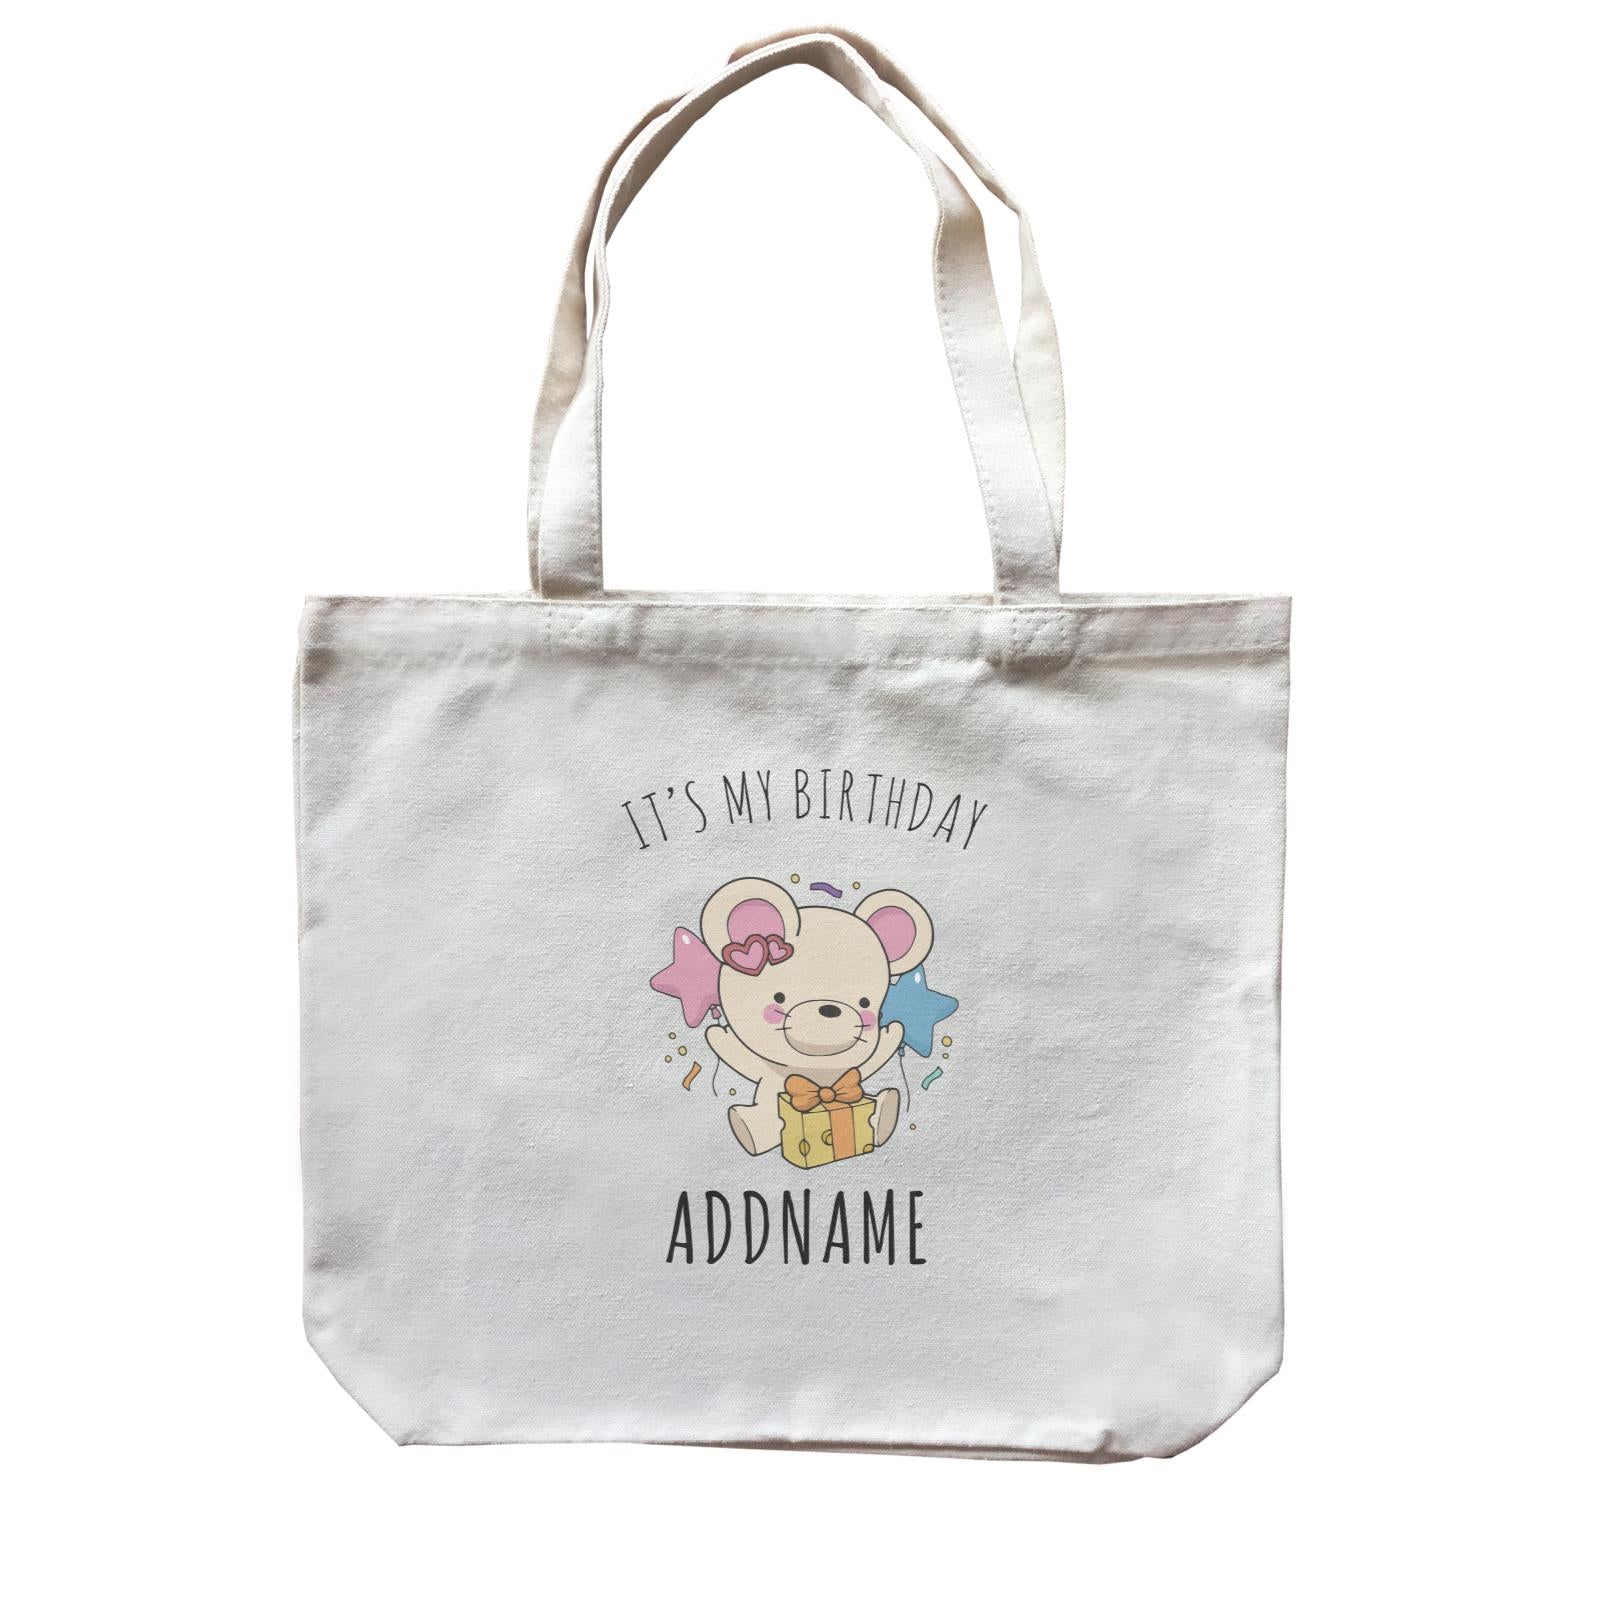 Birthday Sketch Animals Mouse with Cheese Present It's My Birthday Addname Canvas Bag